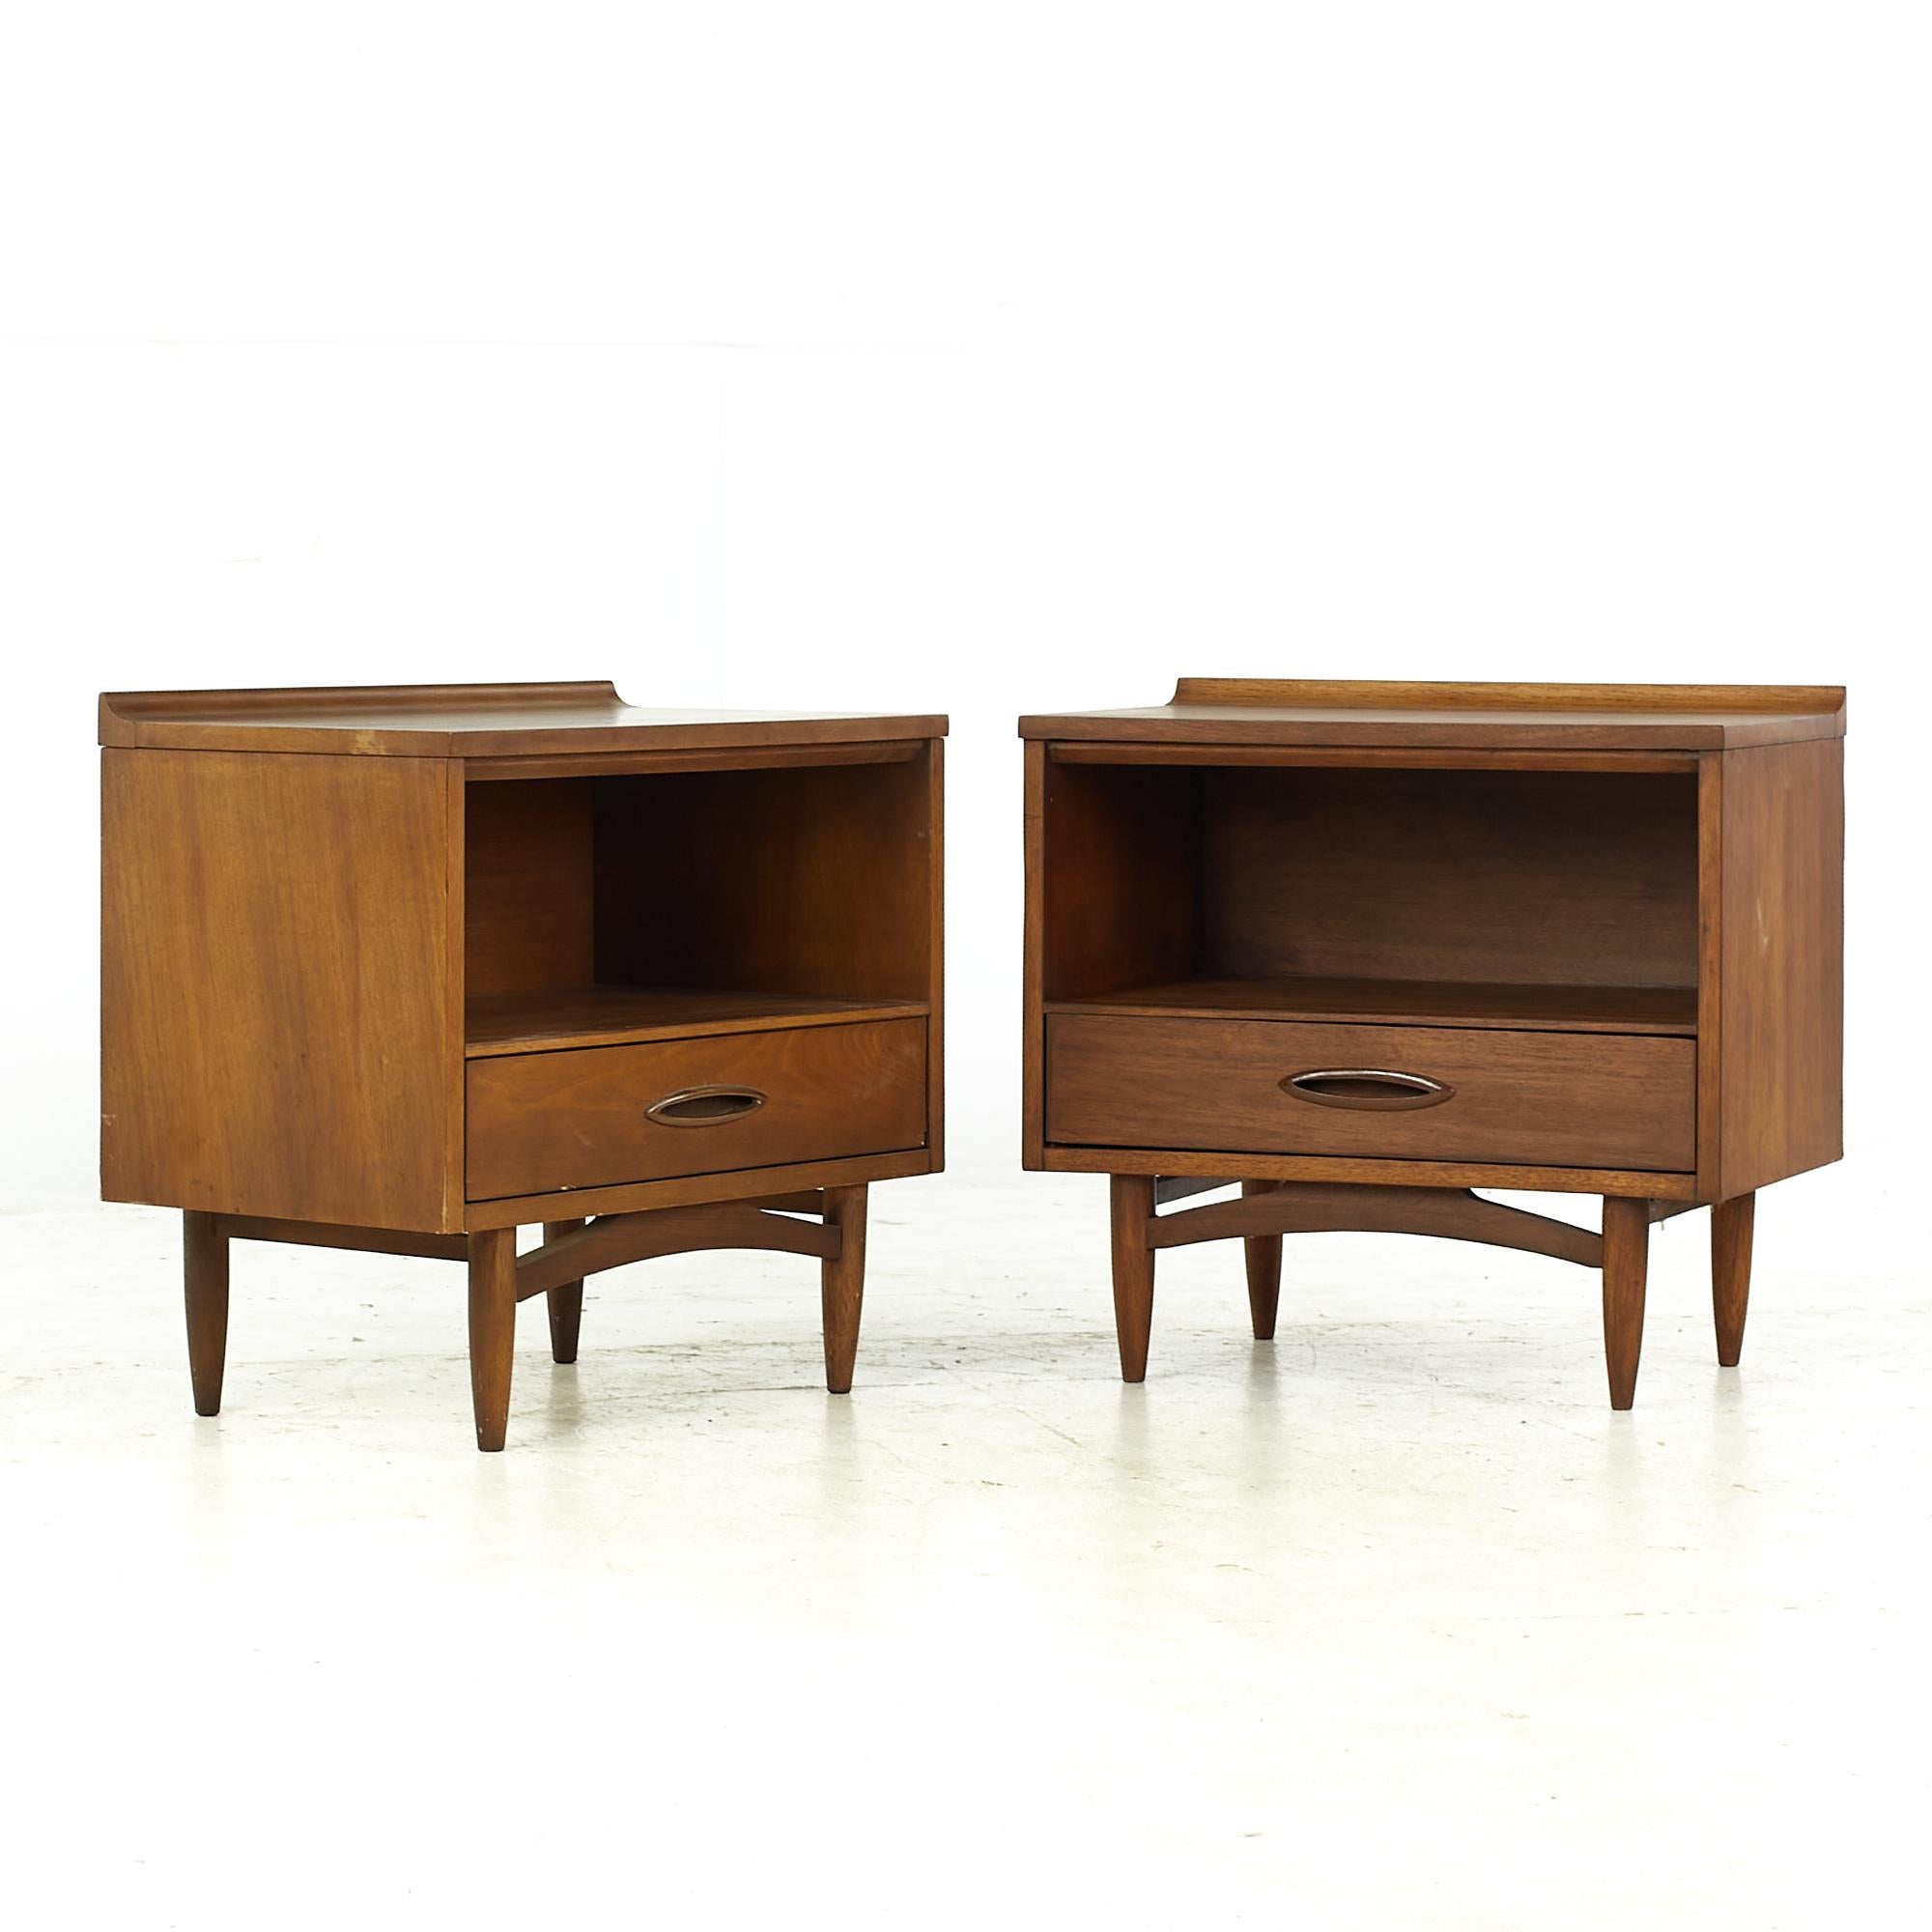 Broyhill sculptra midcentury Walnut nightstand - pair

Each nightstand measures: 24 wide x 15 deep x 22.5 inches high

All pieces of furniture can be had in what we call restored vintage condition. That means the piece is restored upon purchase